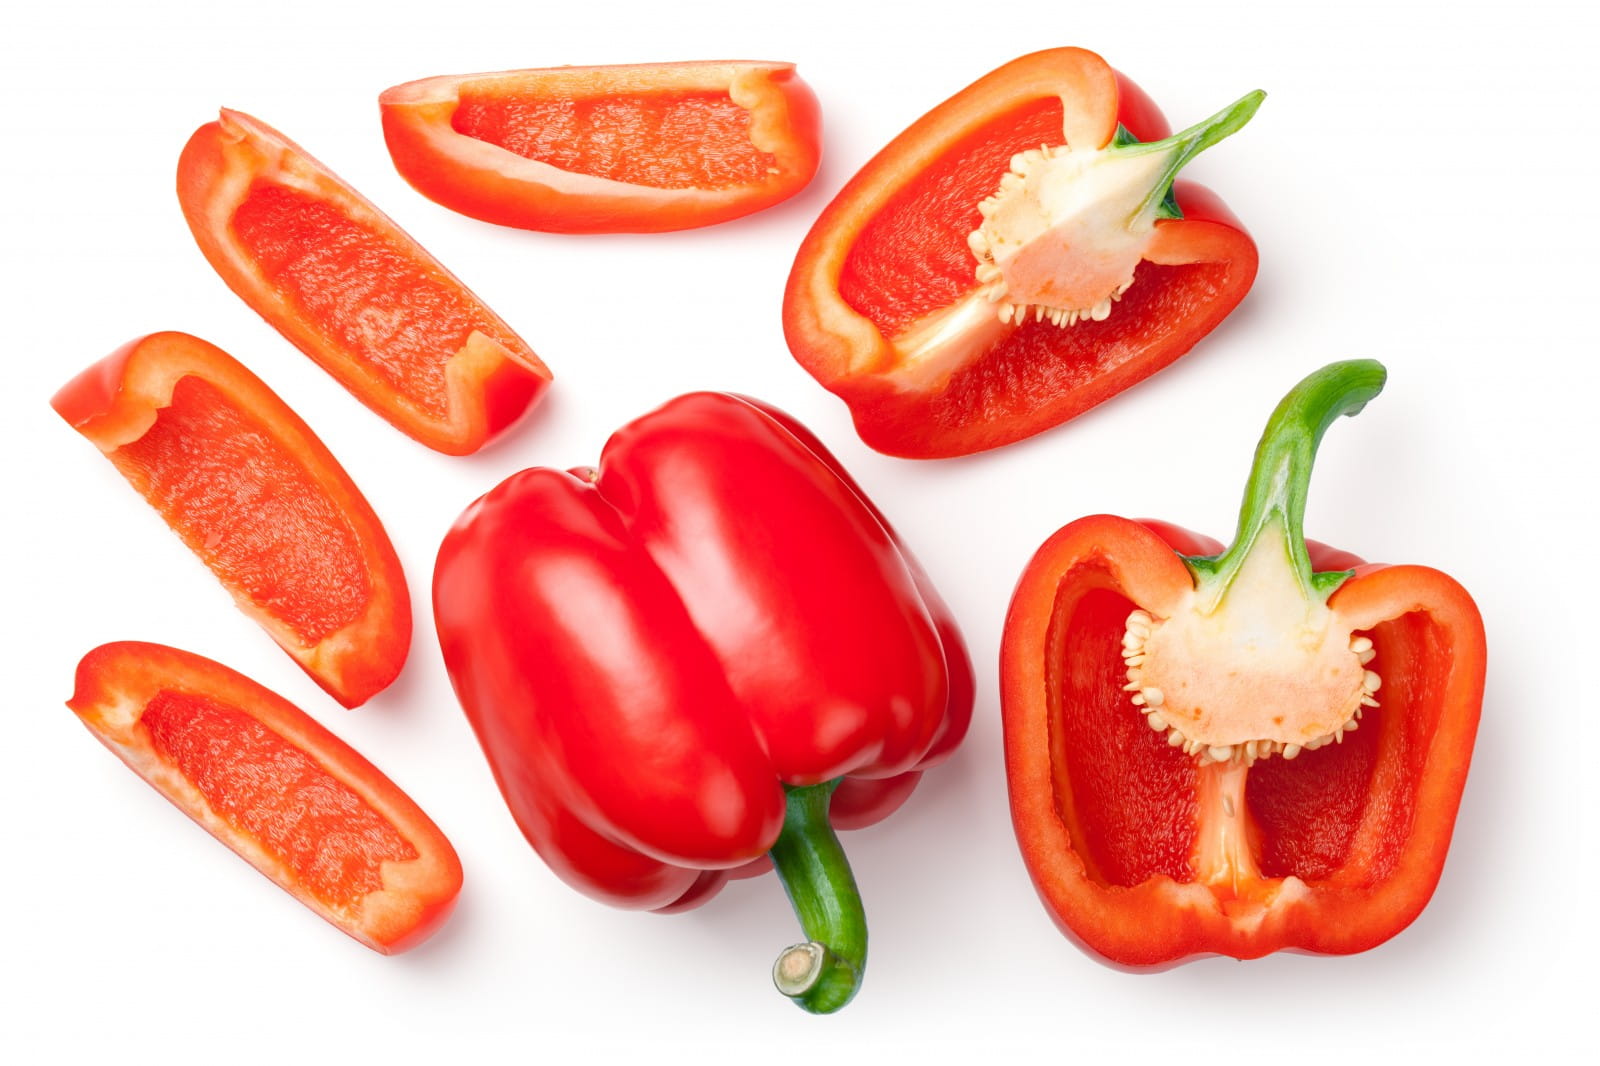 The best wine pairings for peppers